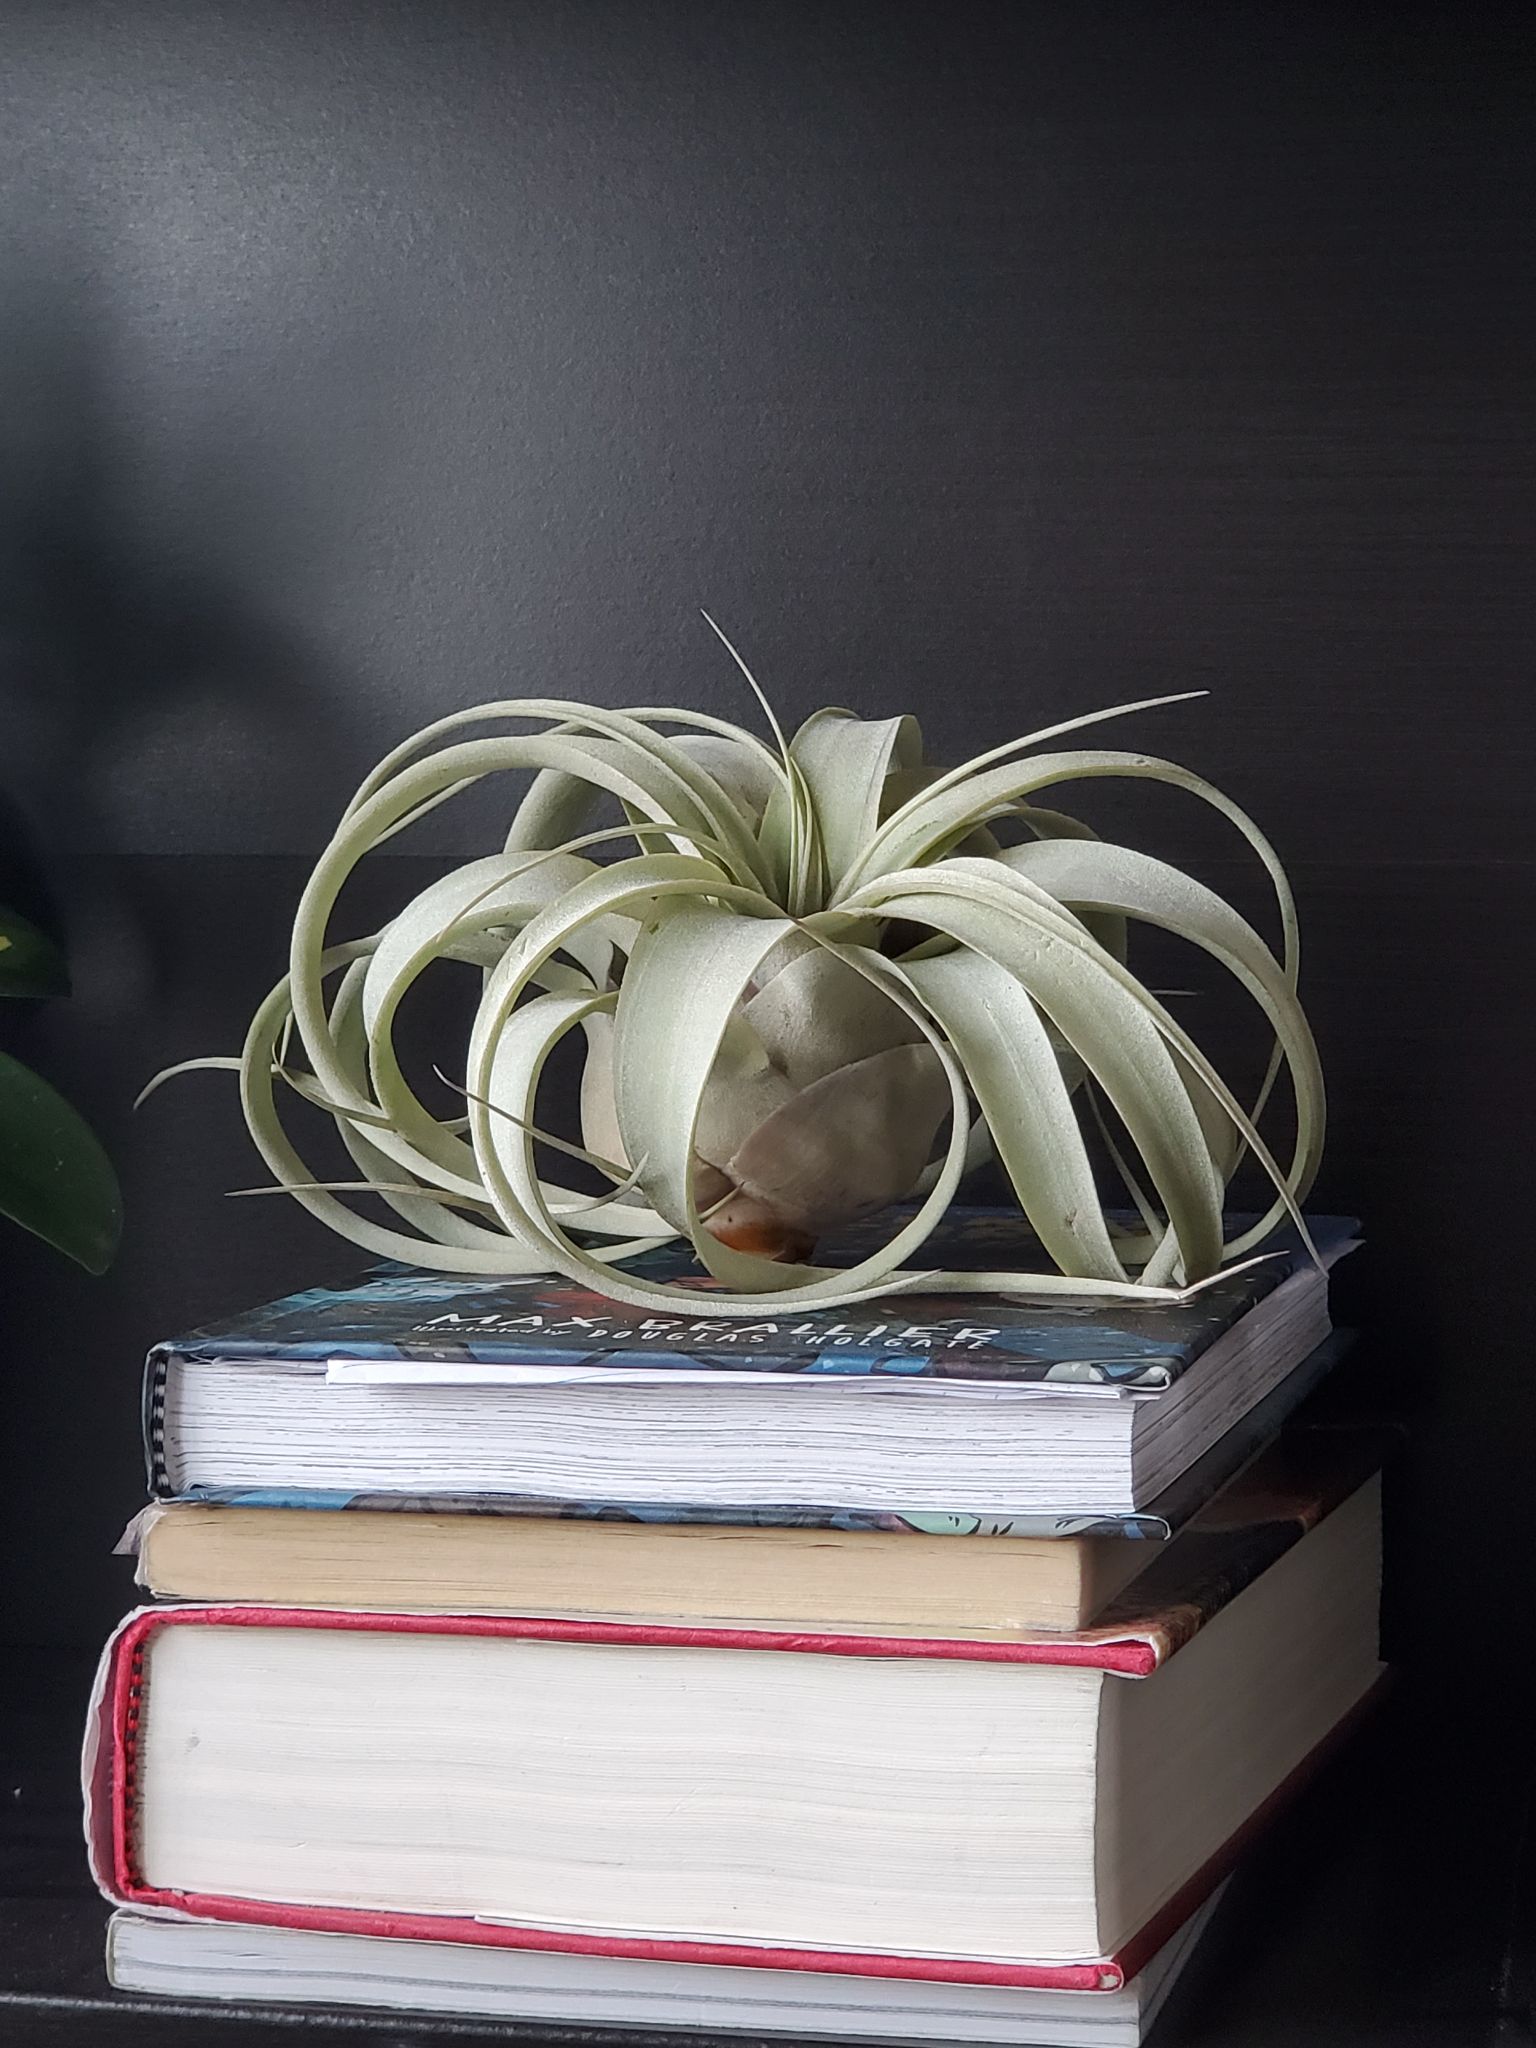 Top 8 Garden Expert Tips for Growing Air Plants that You shouldn't Miss!